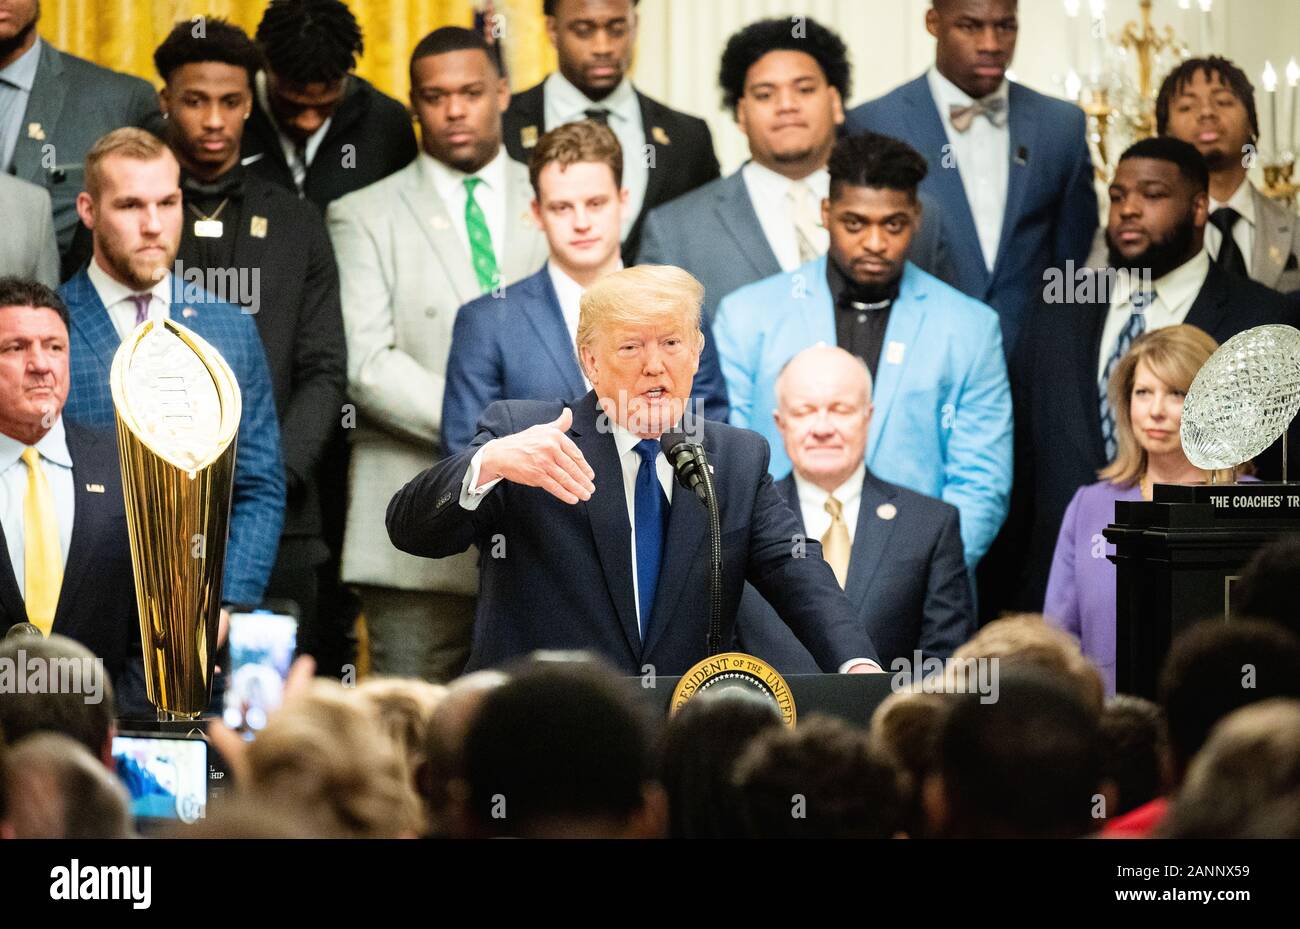 President Donald Trump speaks at the East Room during the occasion of the visit of the 2019 College Football National Champions, the Louisiana State University Tigers, to the White House. Stock Photo